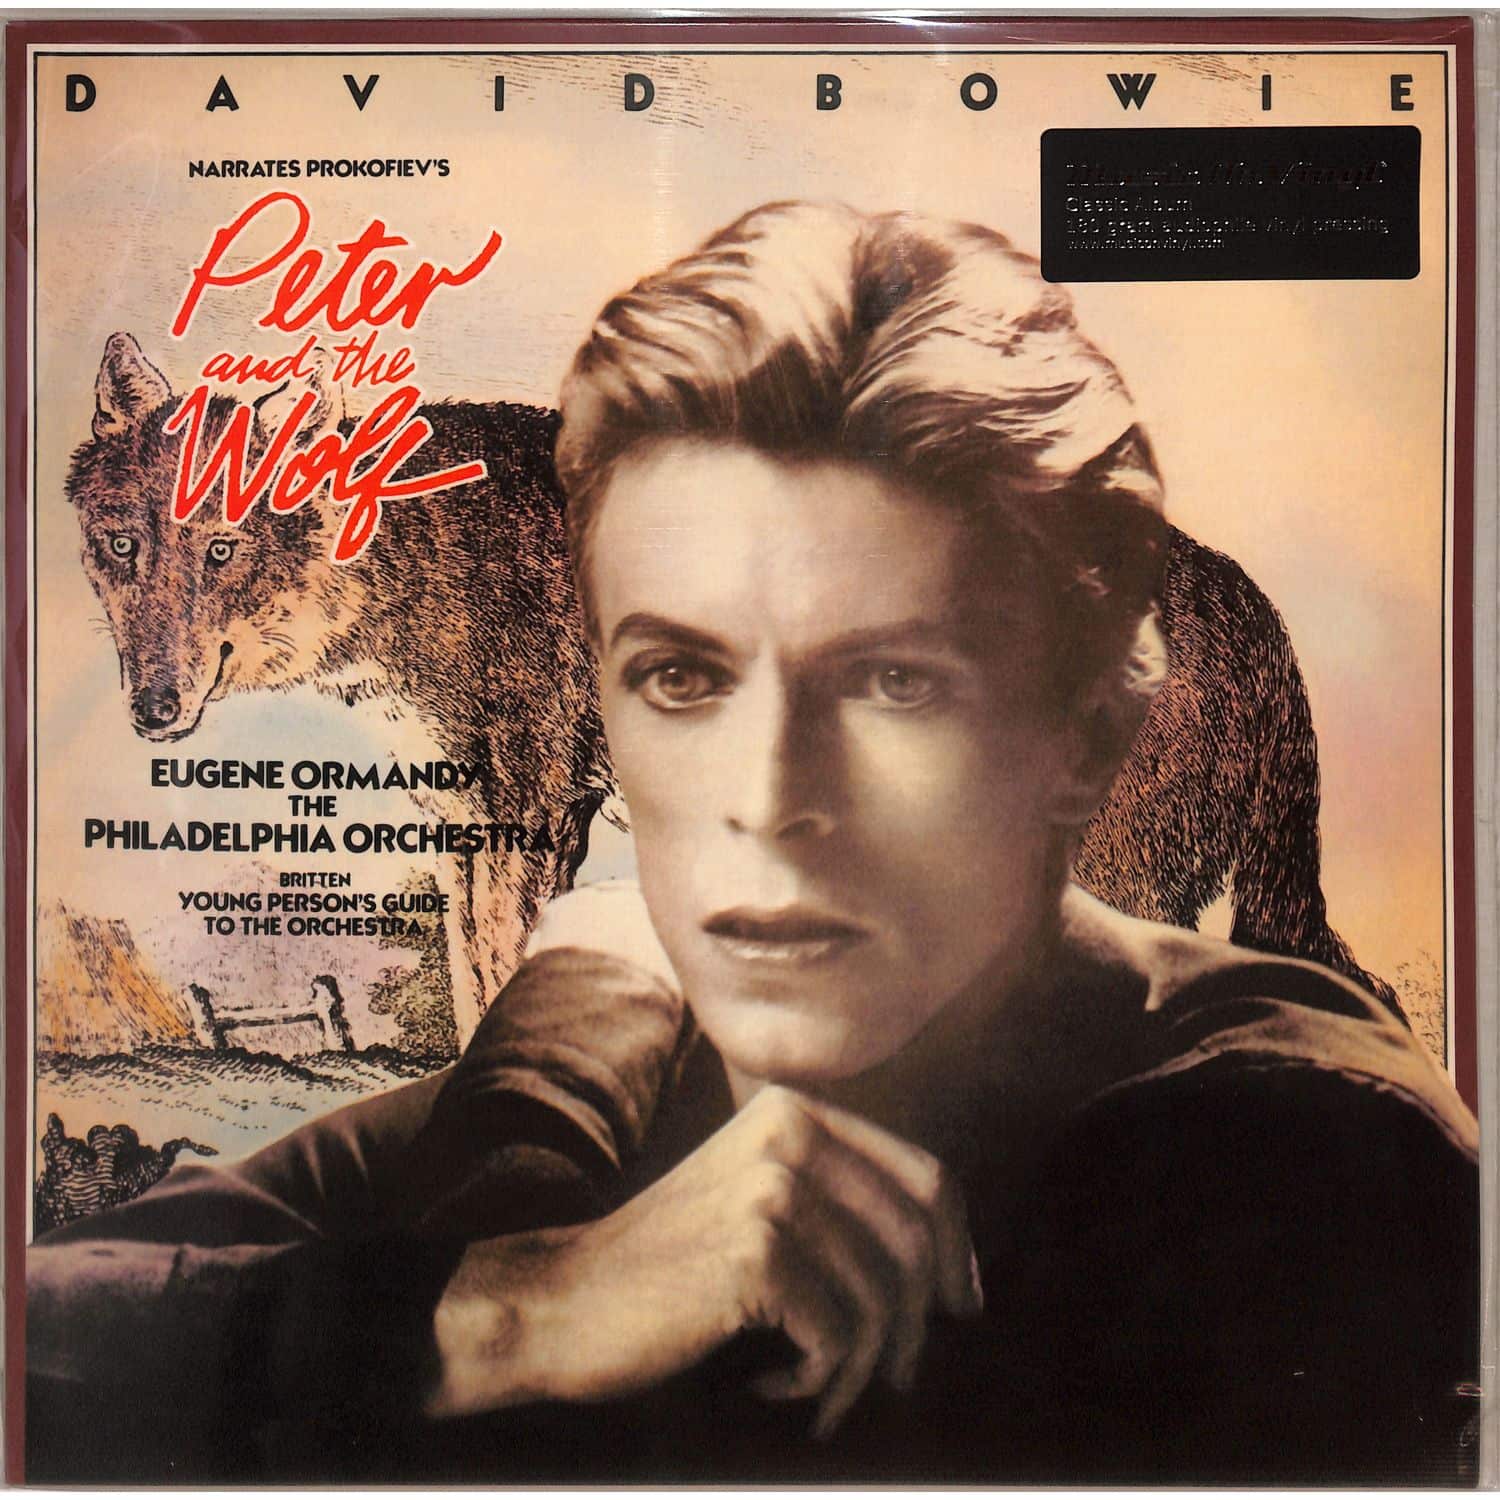 David Bowie - PETER & THE WOLF 